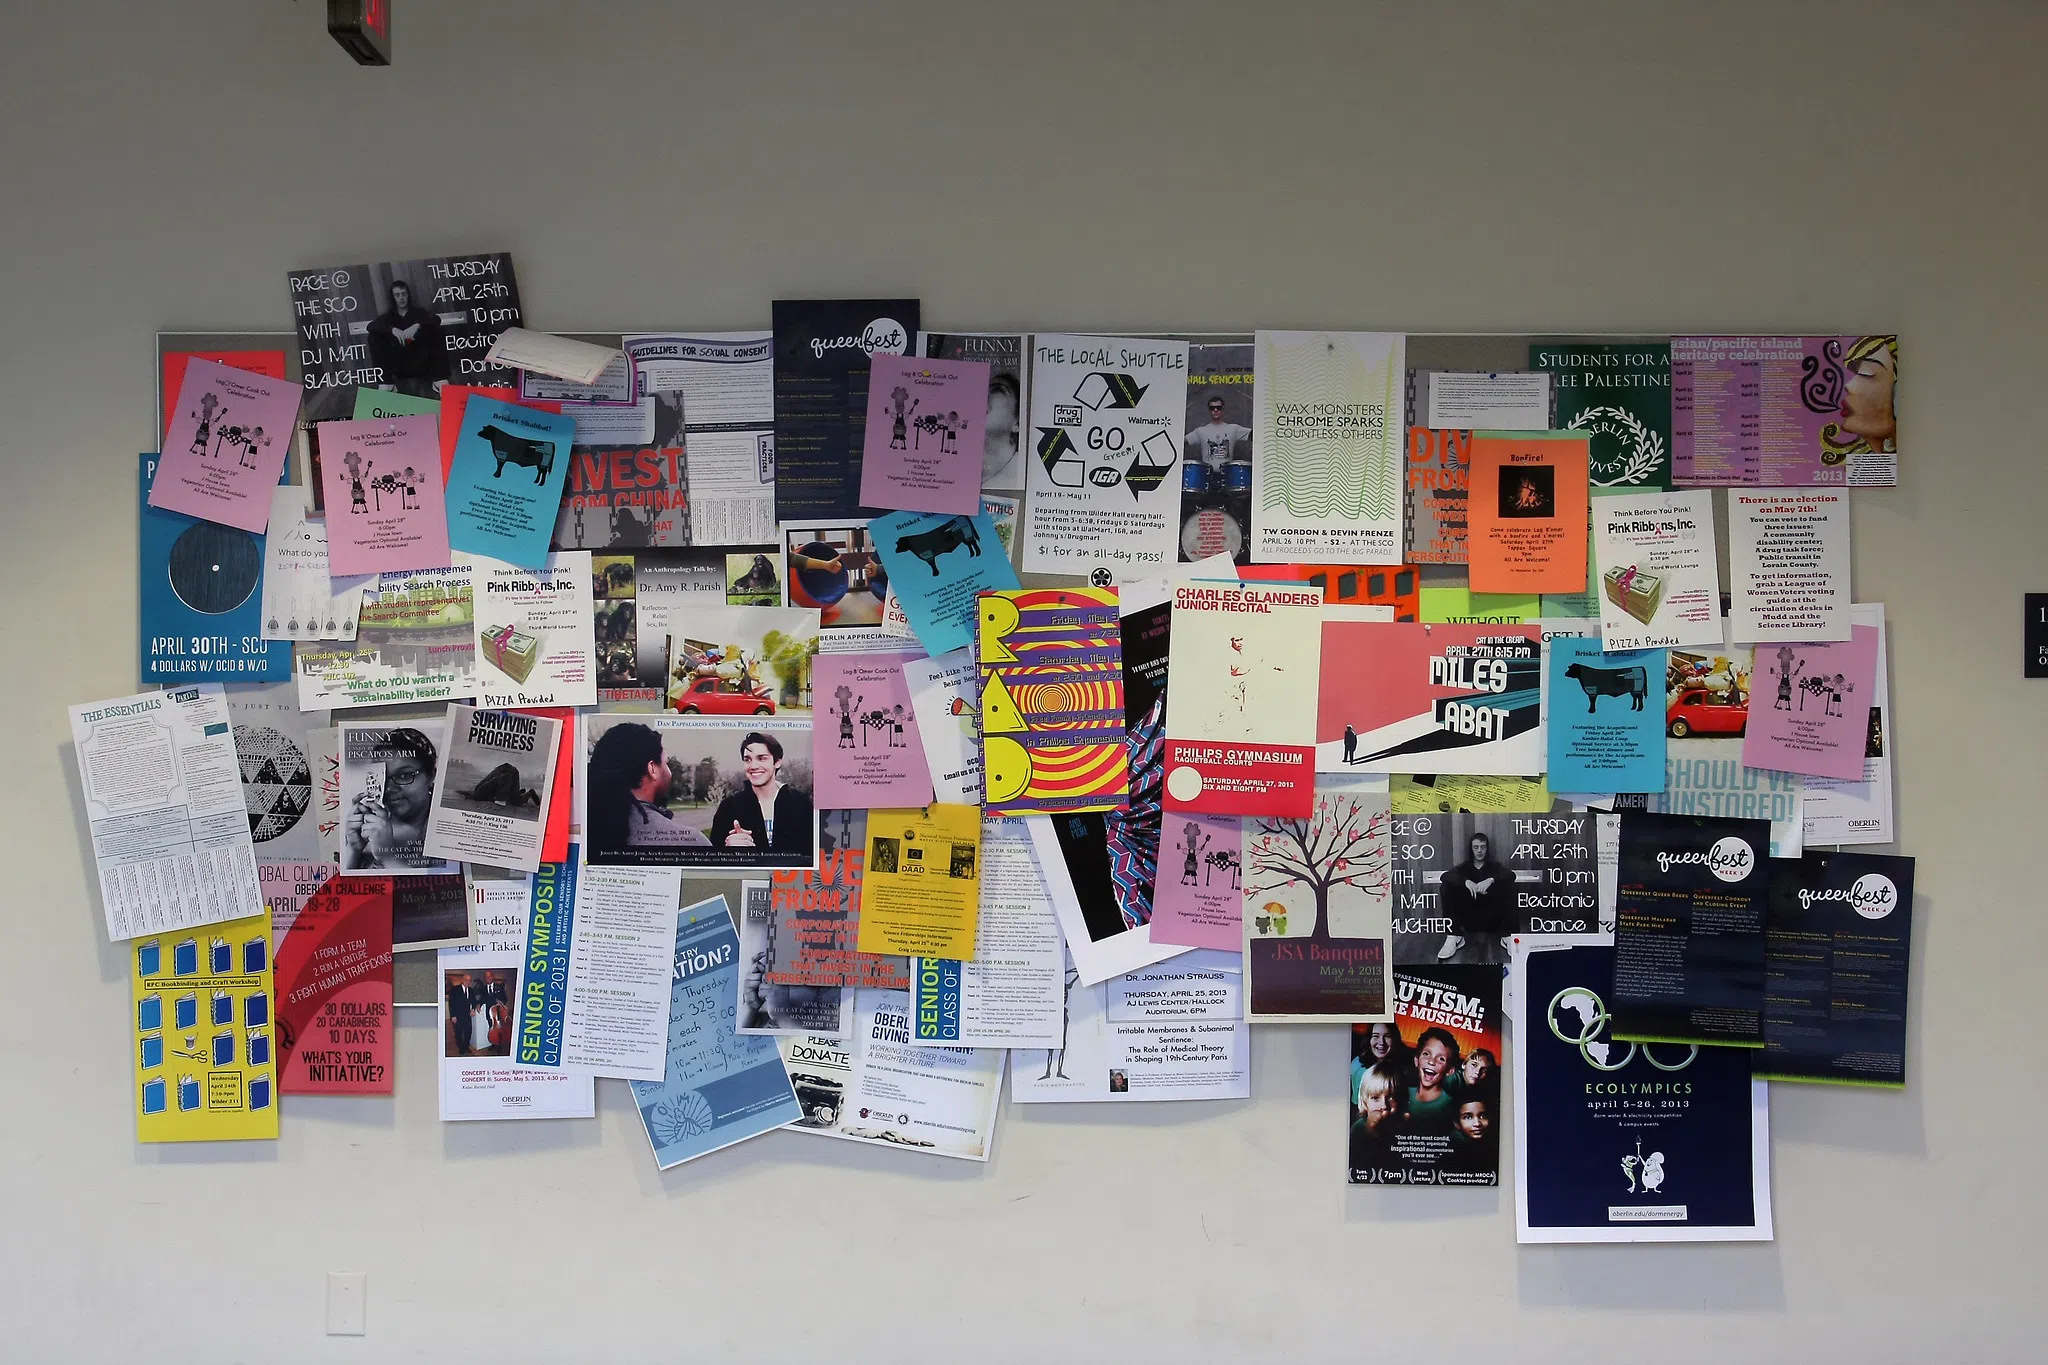 A bulletin board of colorful posters is overflowing with activities, events, author talks, grad school info, and shows.